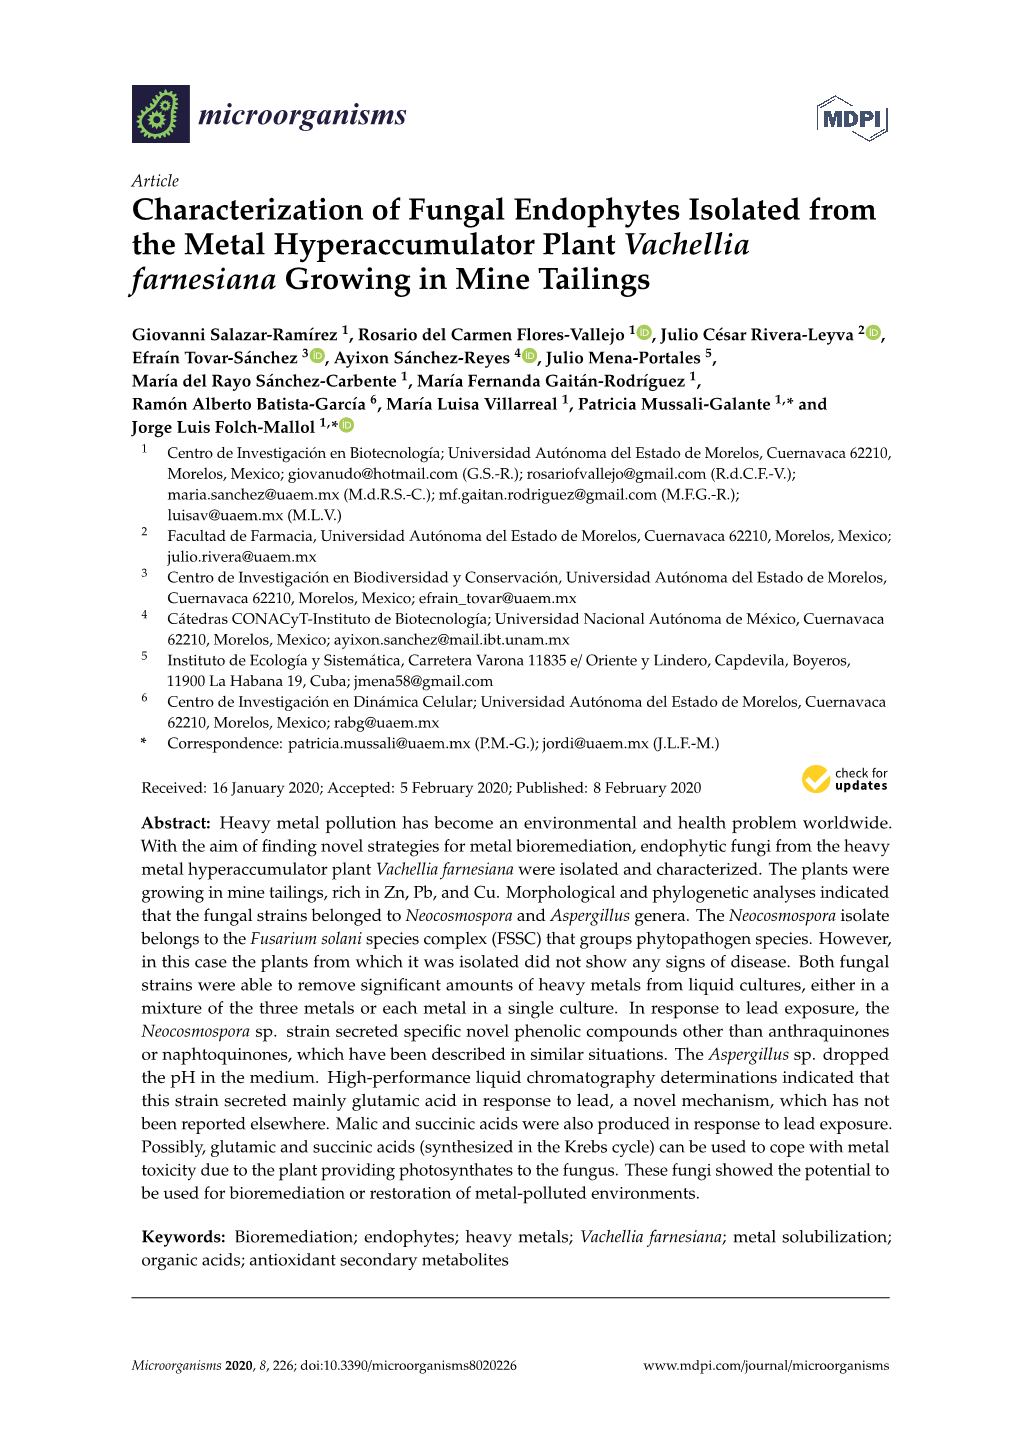 Characterization of Fungal Endophytes Isolated from the Metal Hyperaccumulator Plant Vachellia Farnesiana Growing in Mine Tailings